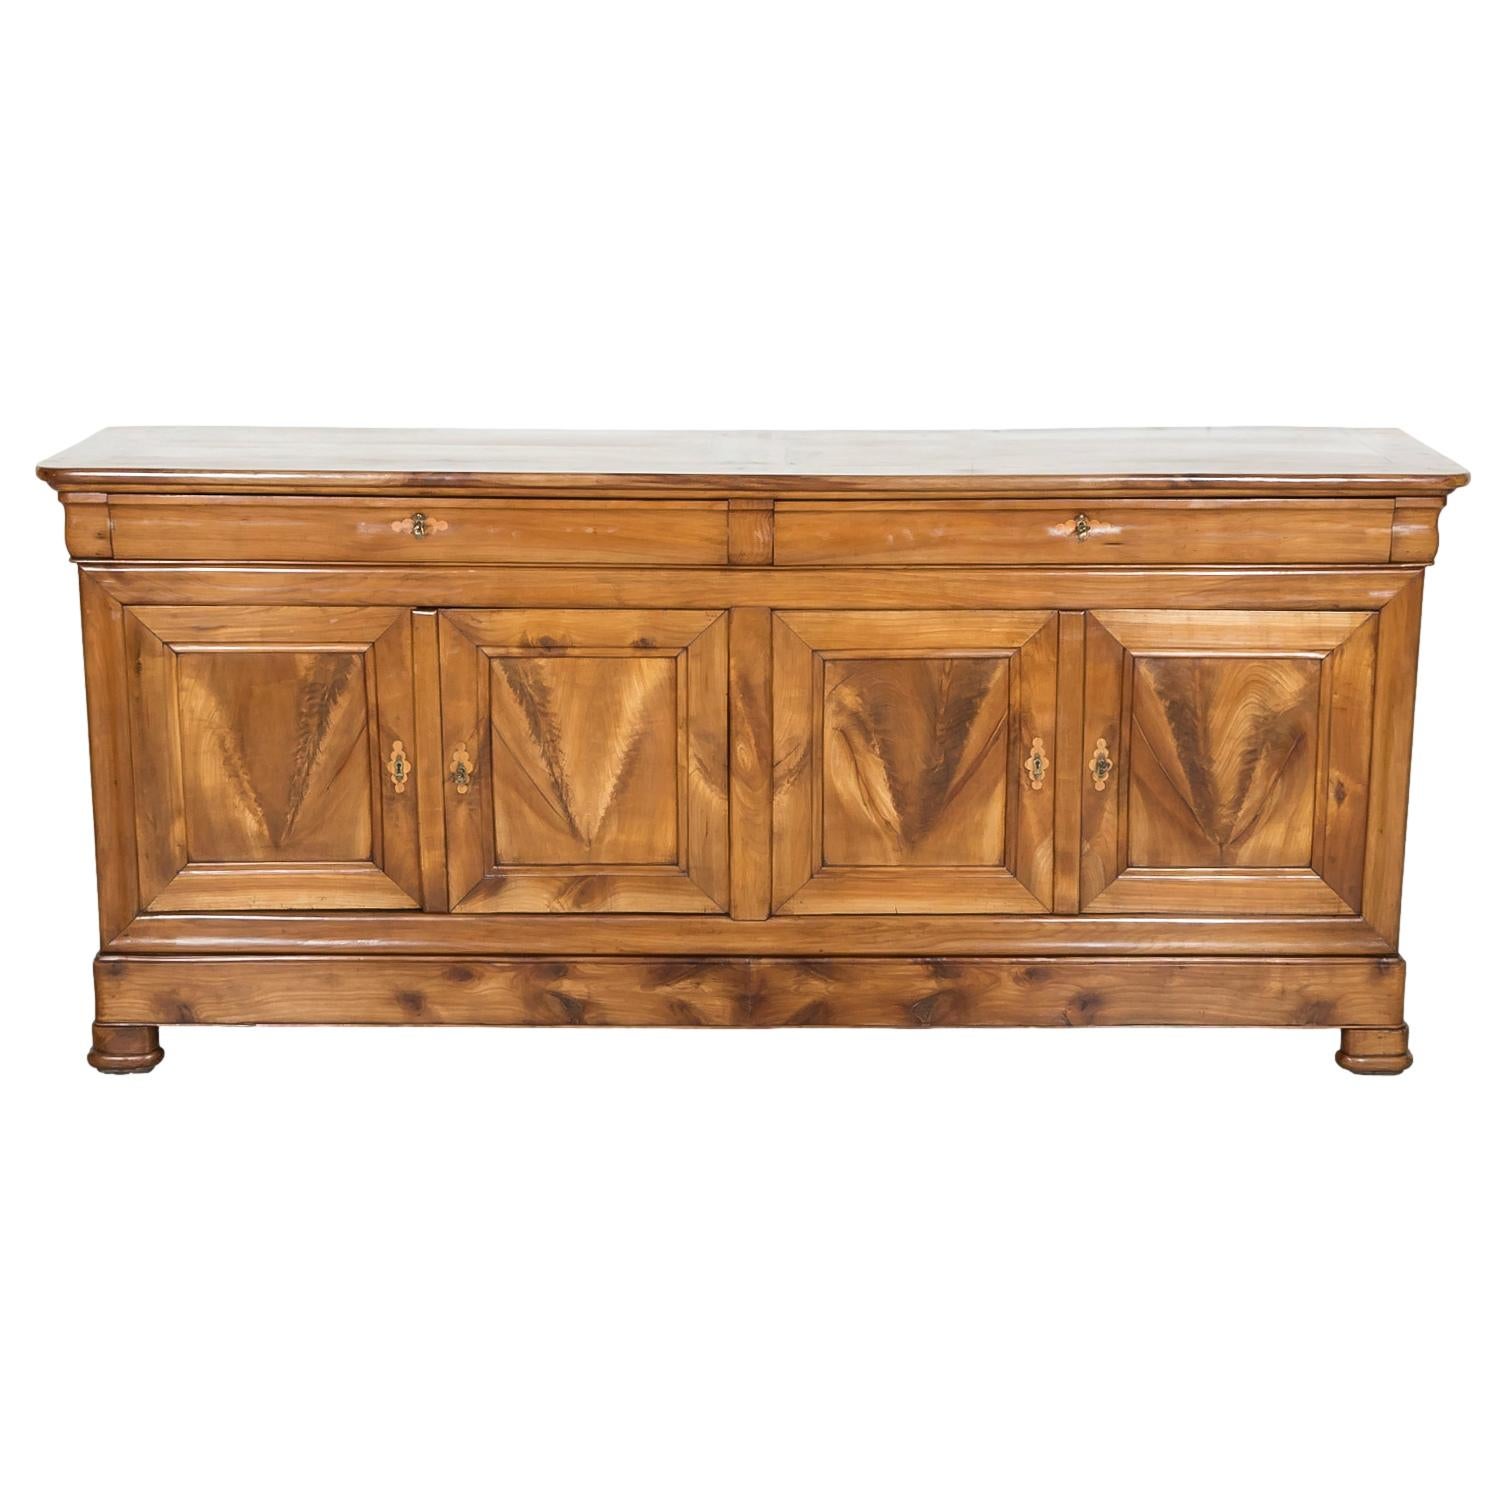 An impressive 19th century French Louis Philippe period enfilade buffet handcrafted by skilled artisans in the Brittany region of solid cherry wood with beautifully inlaid lemon wood escutcheons that only add to the authenticity and historical